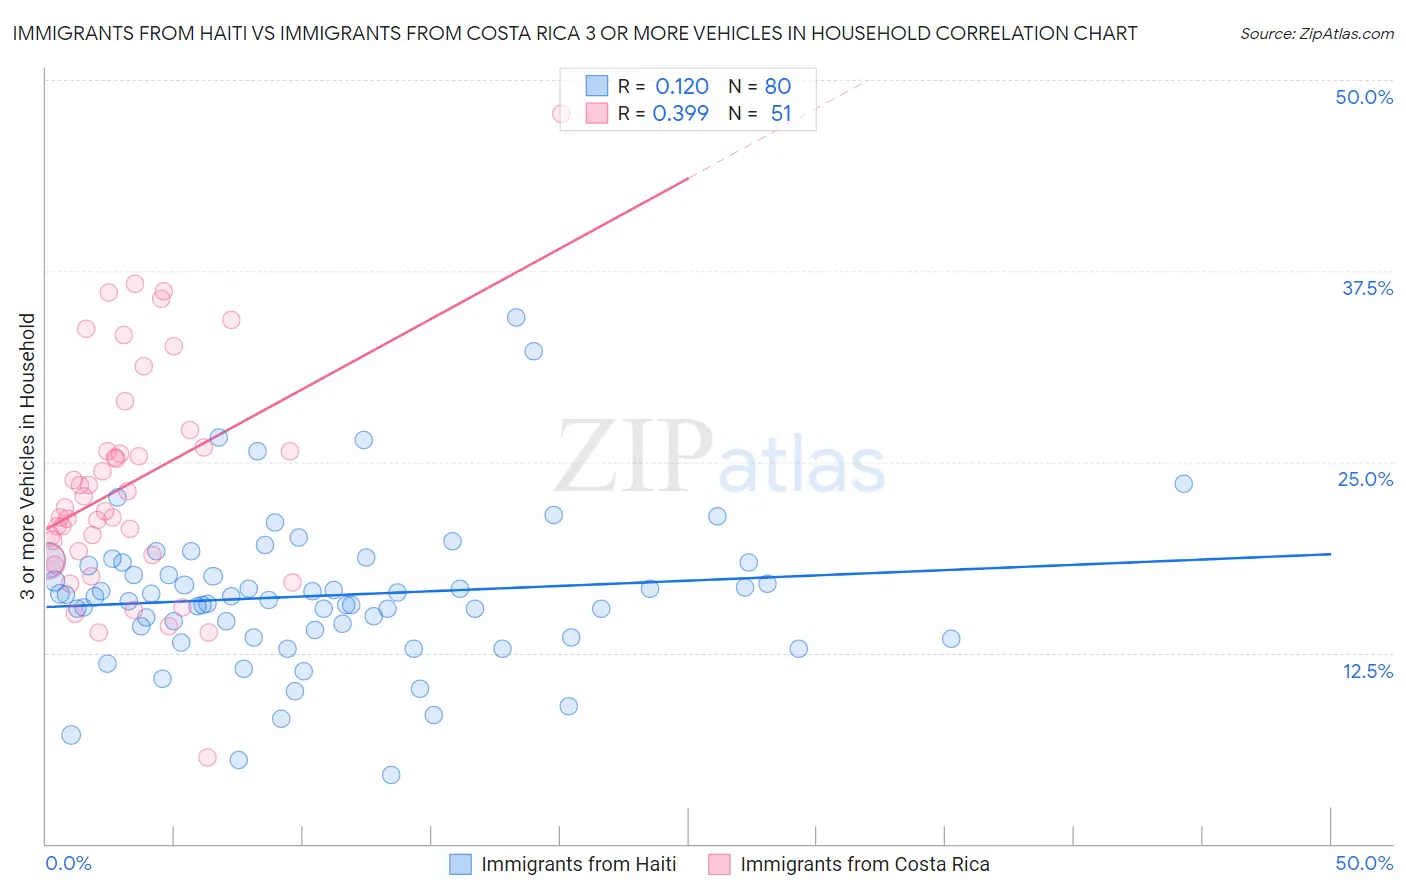 Immigrants from Haiti vs Immigrants from Costa Rica 3 or more Vehicles in Household